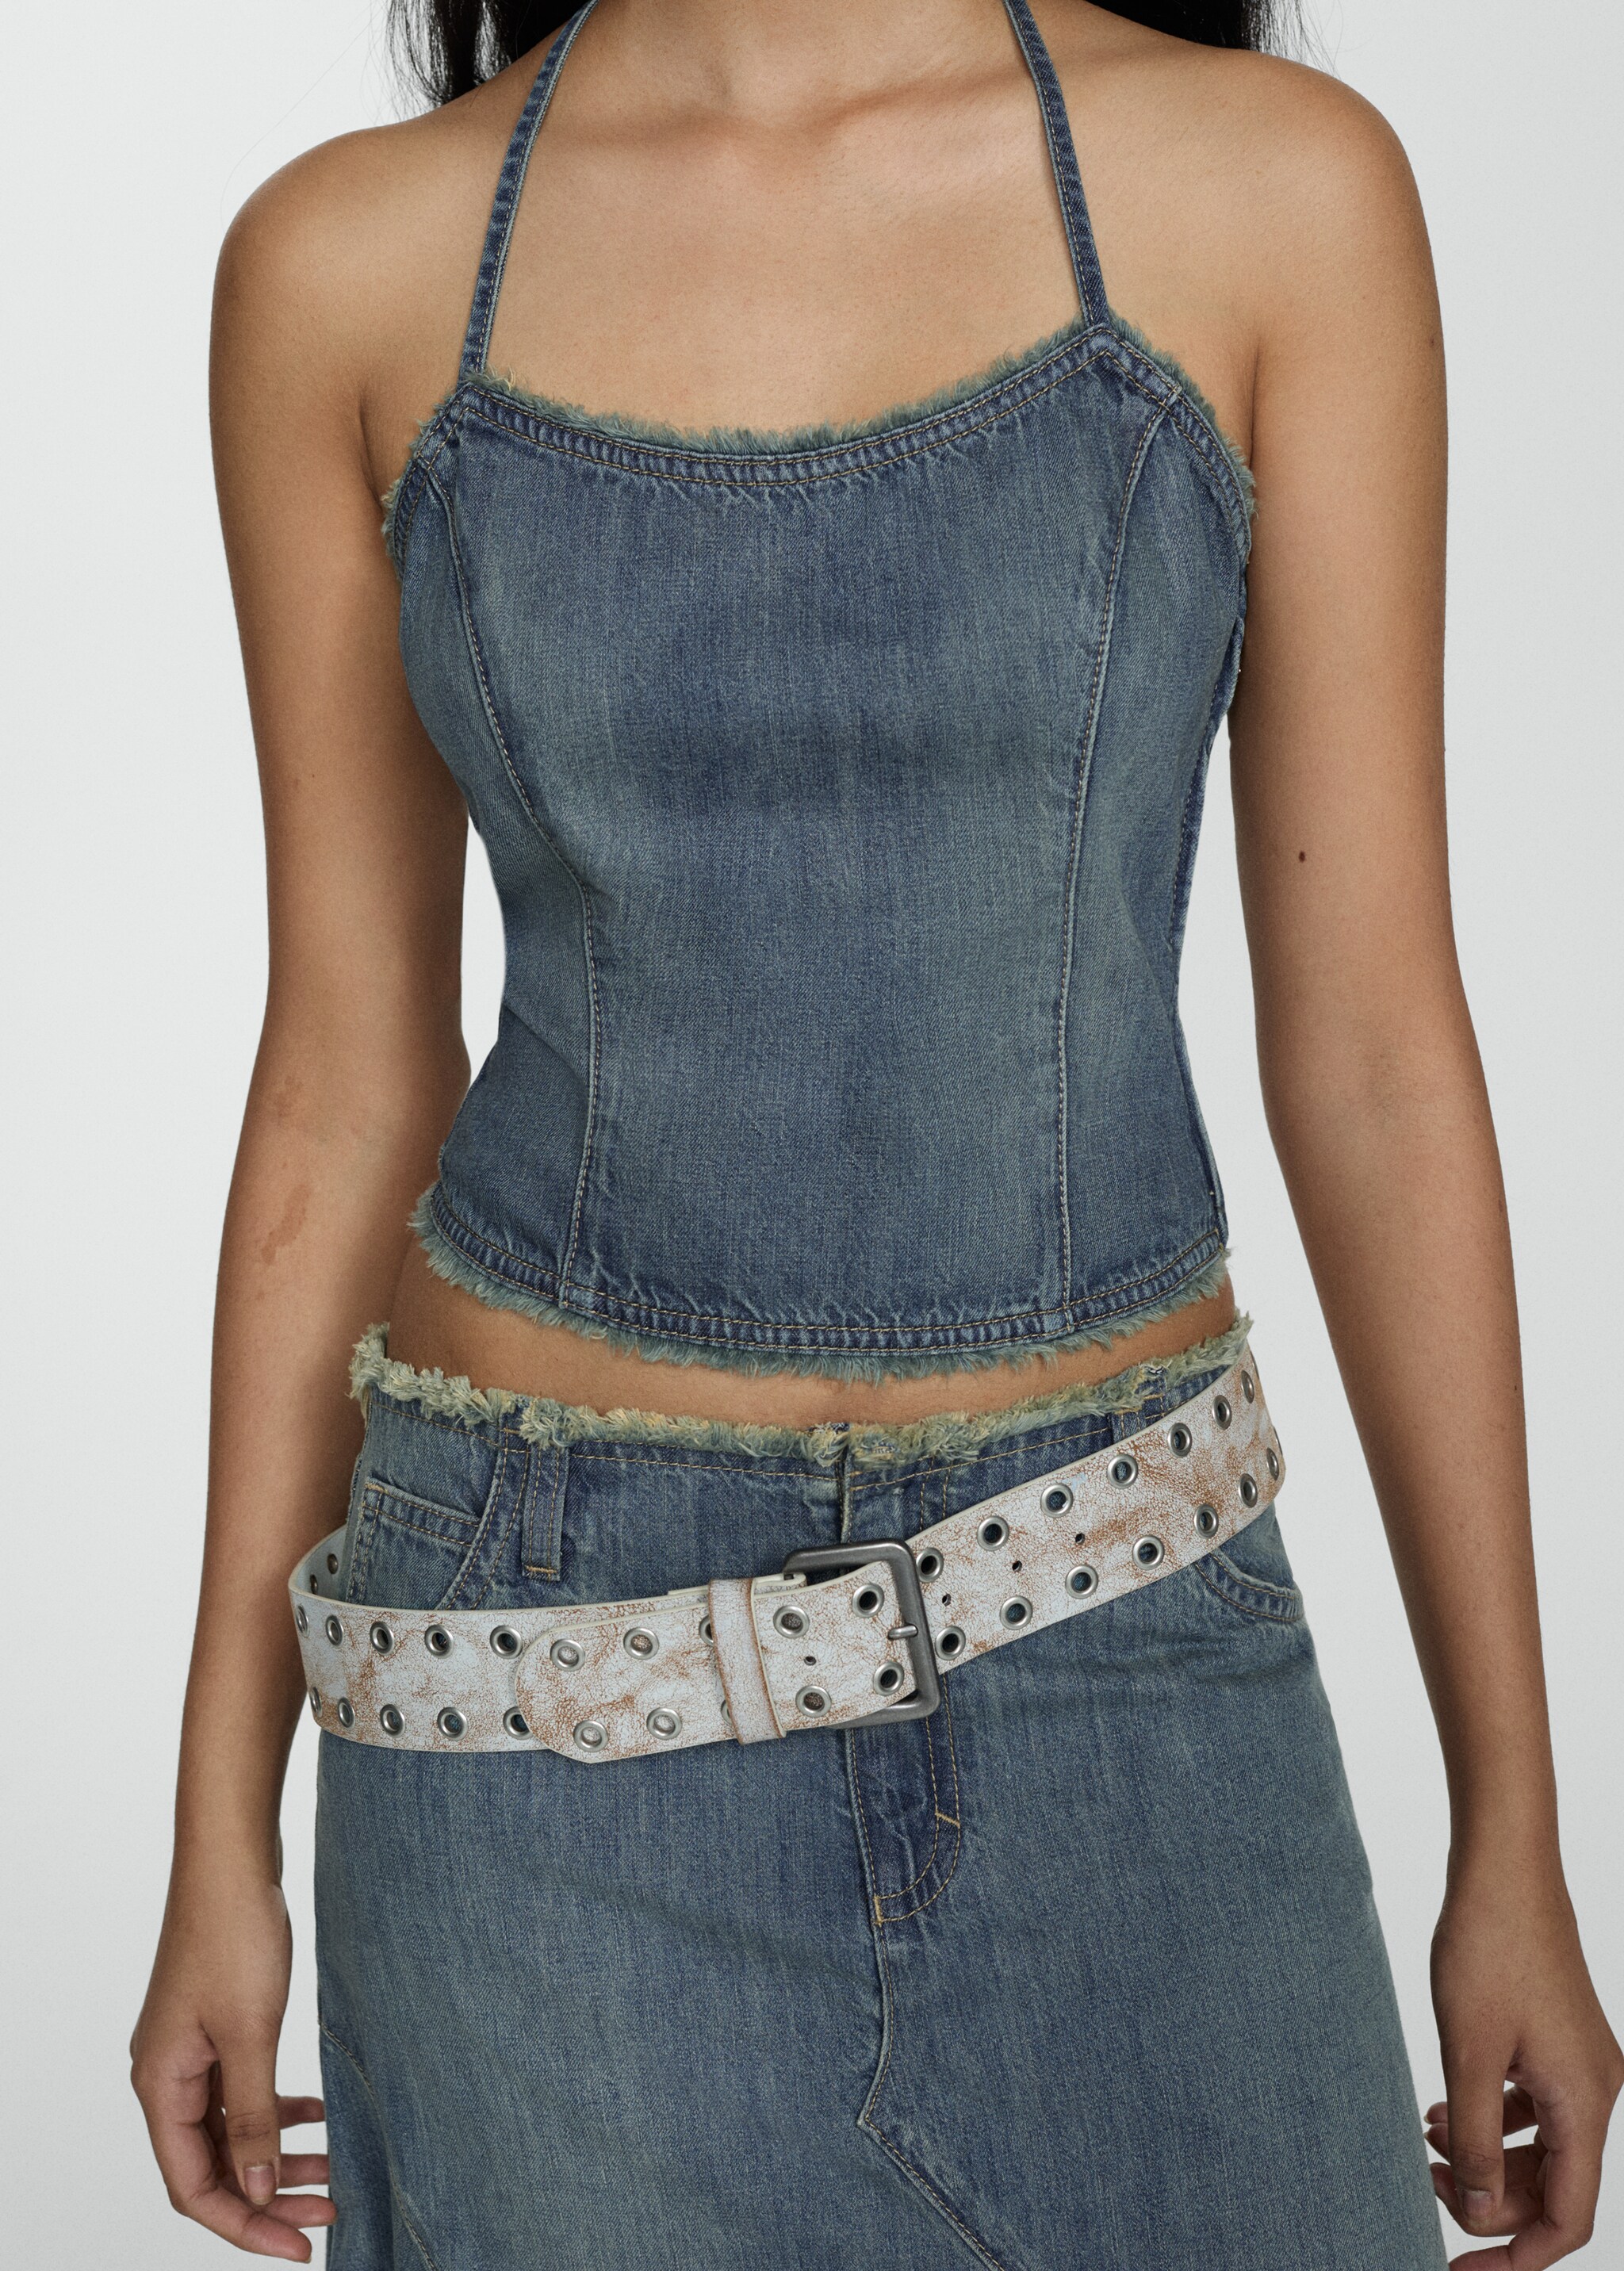 Denim top with frayed ends - Details of the article 6